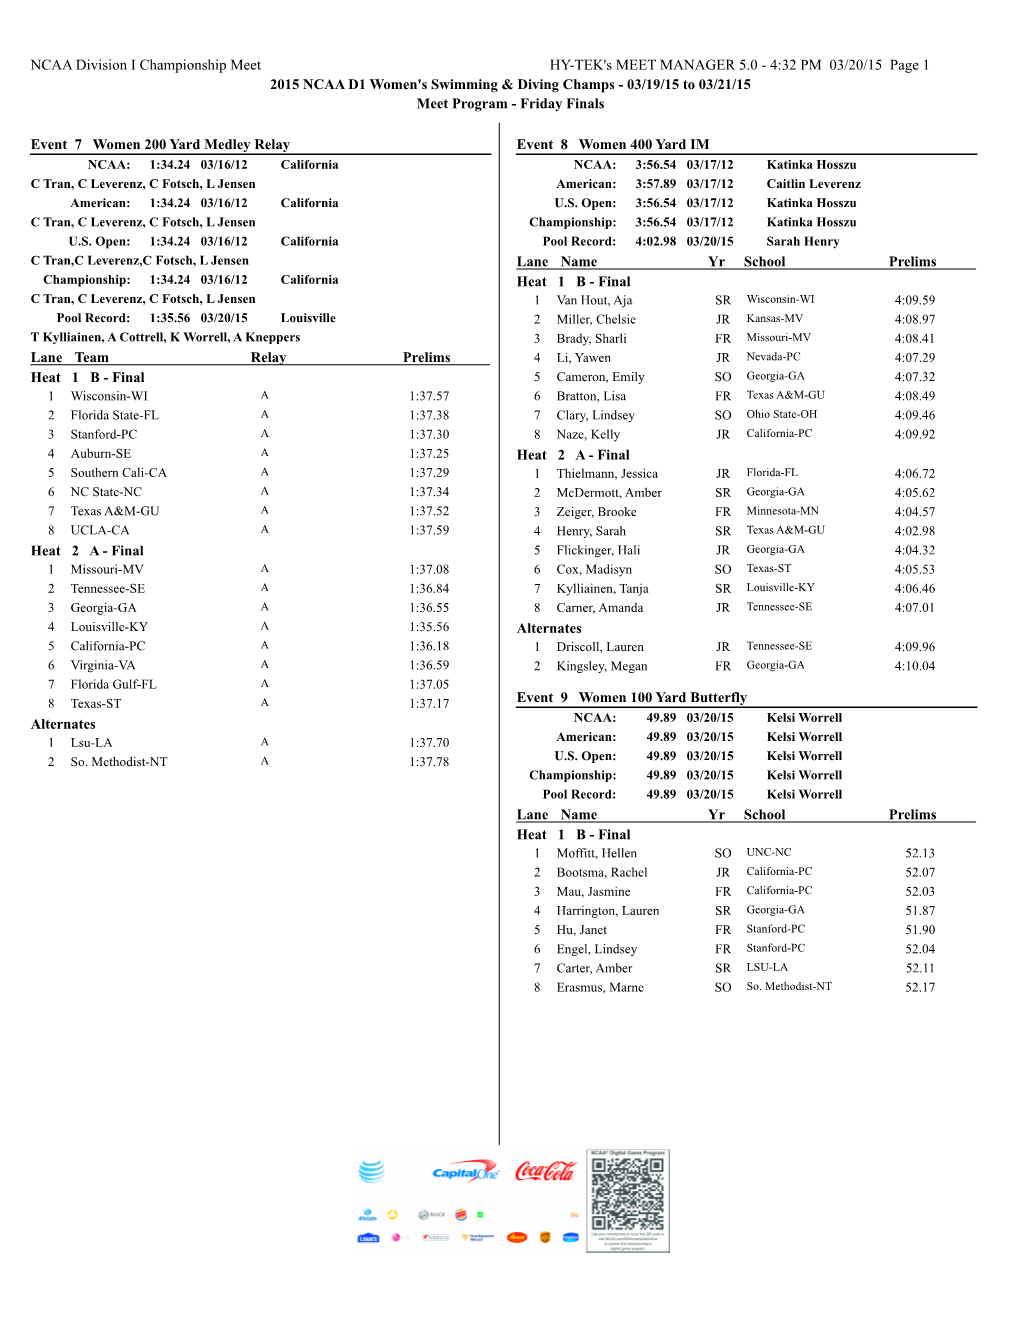 4:32 PM 03/20/15 Page 1 2015 NCAA D1 Women's Swimming & Divi